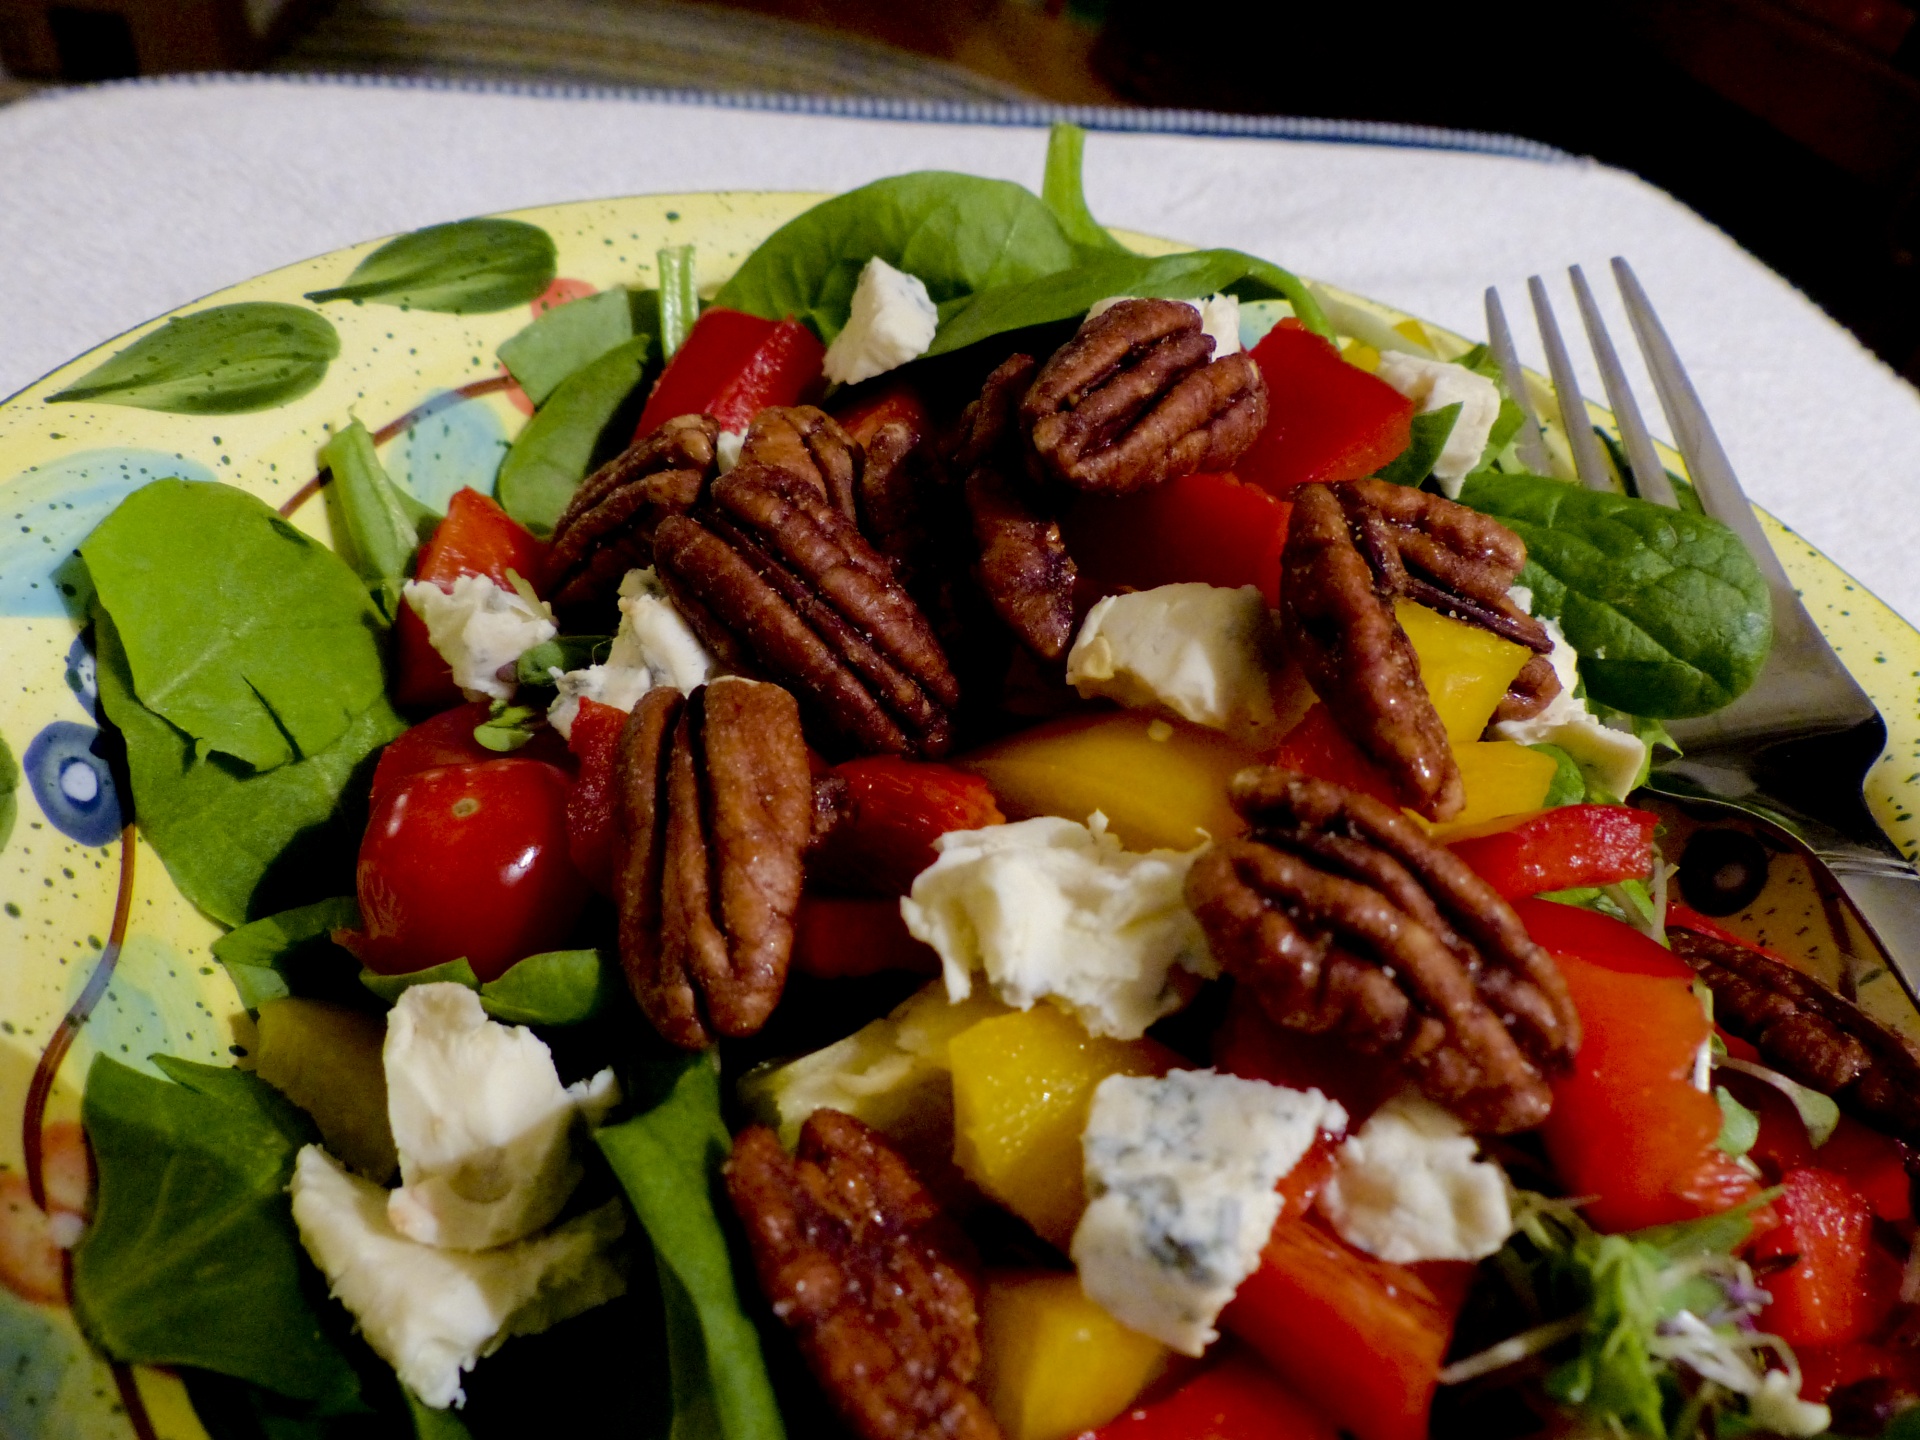 Spinach Salad With Strawberries and Caramelized Pecans